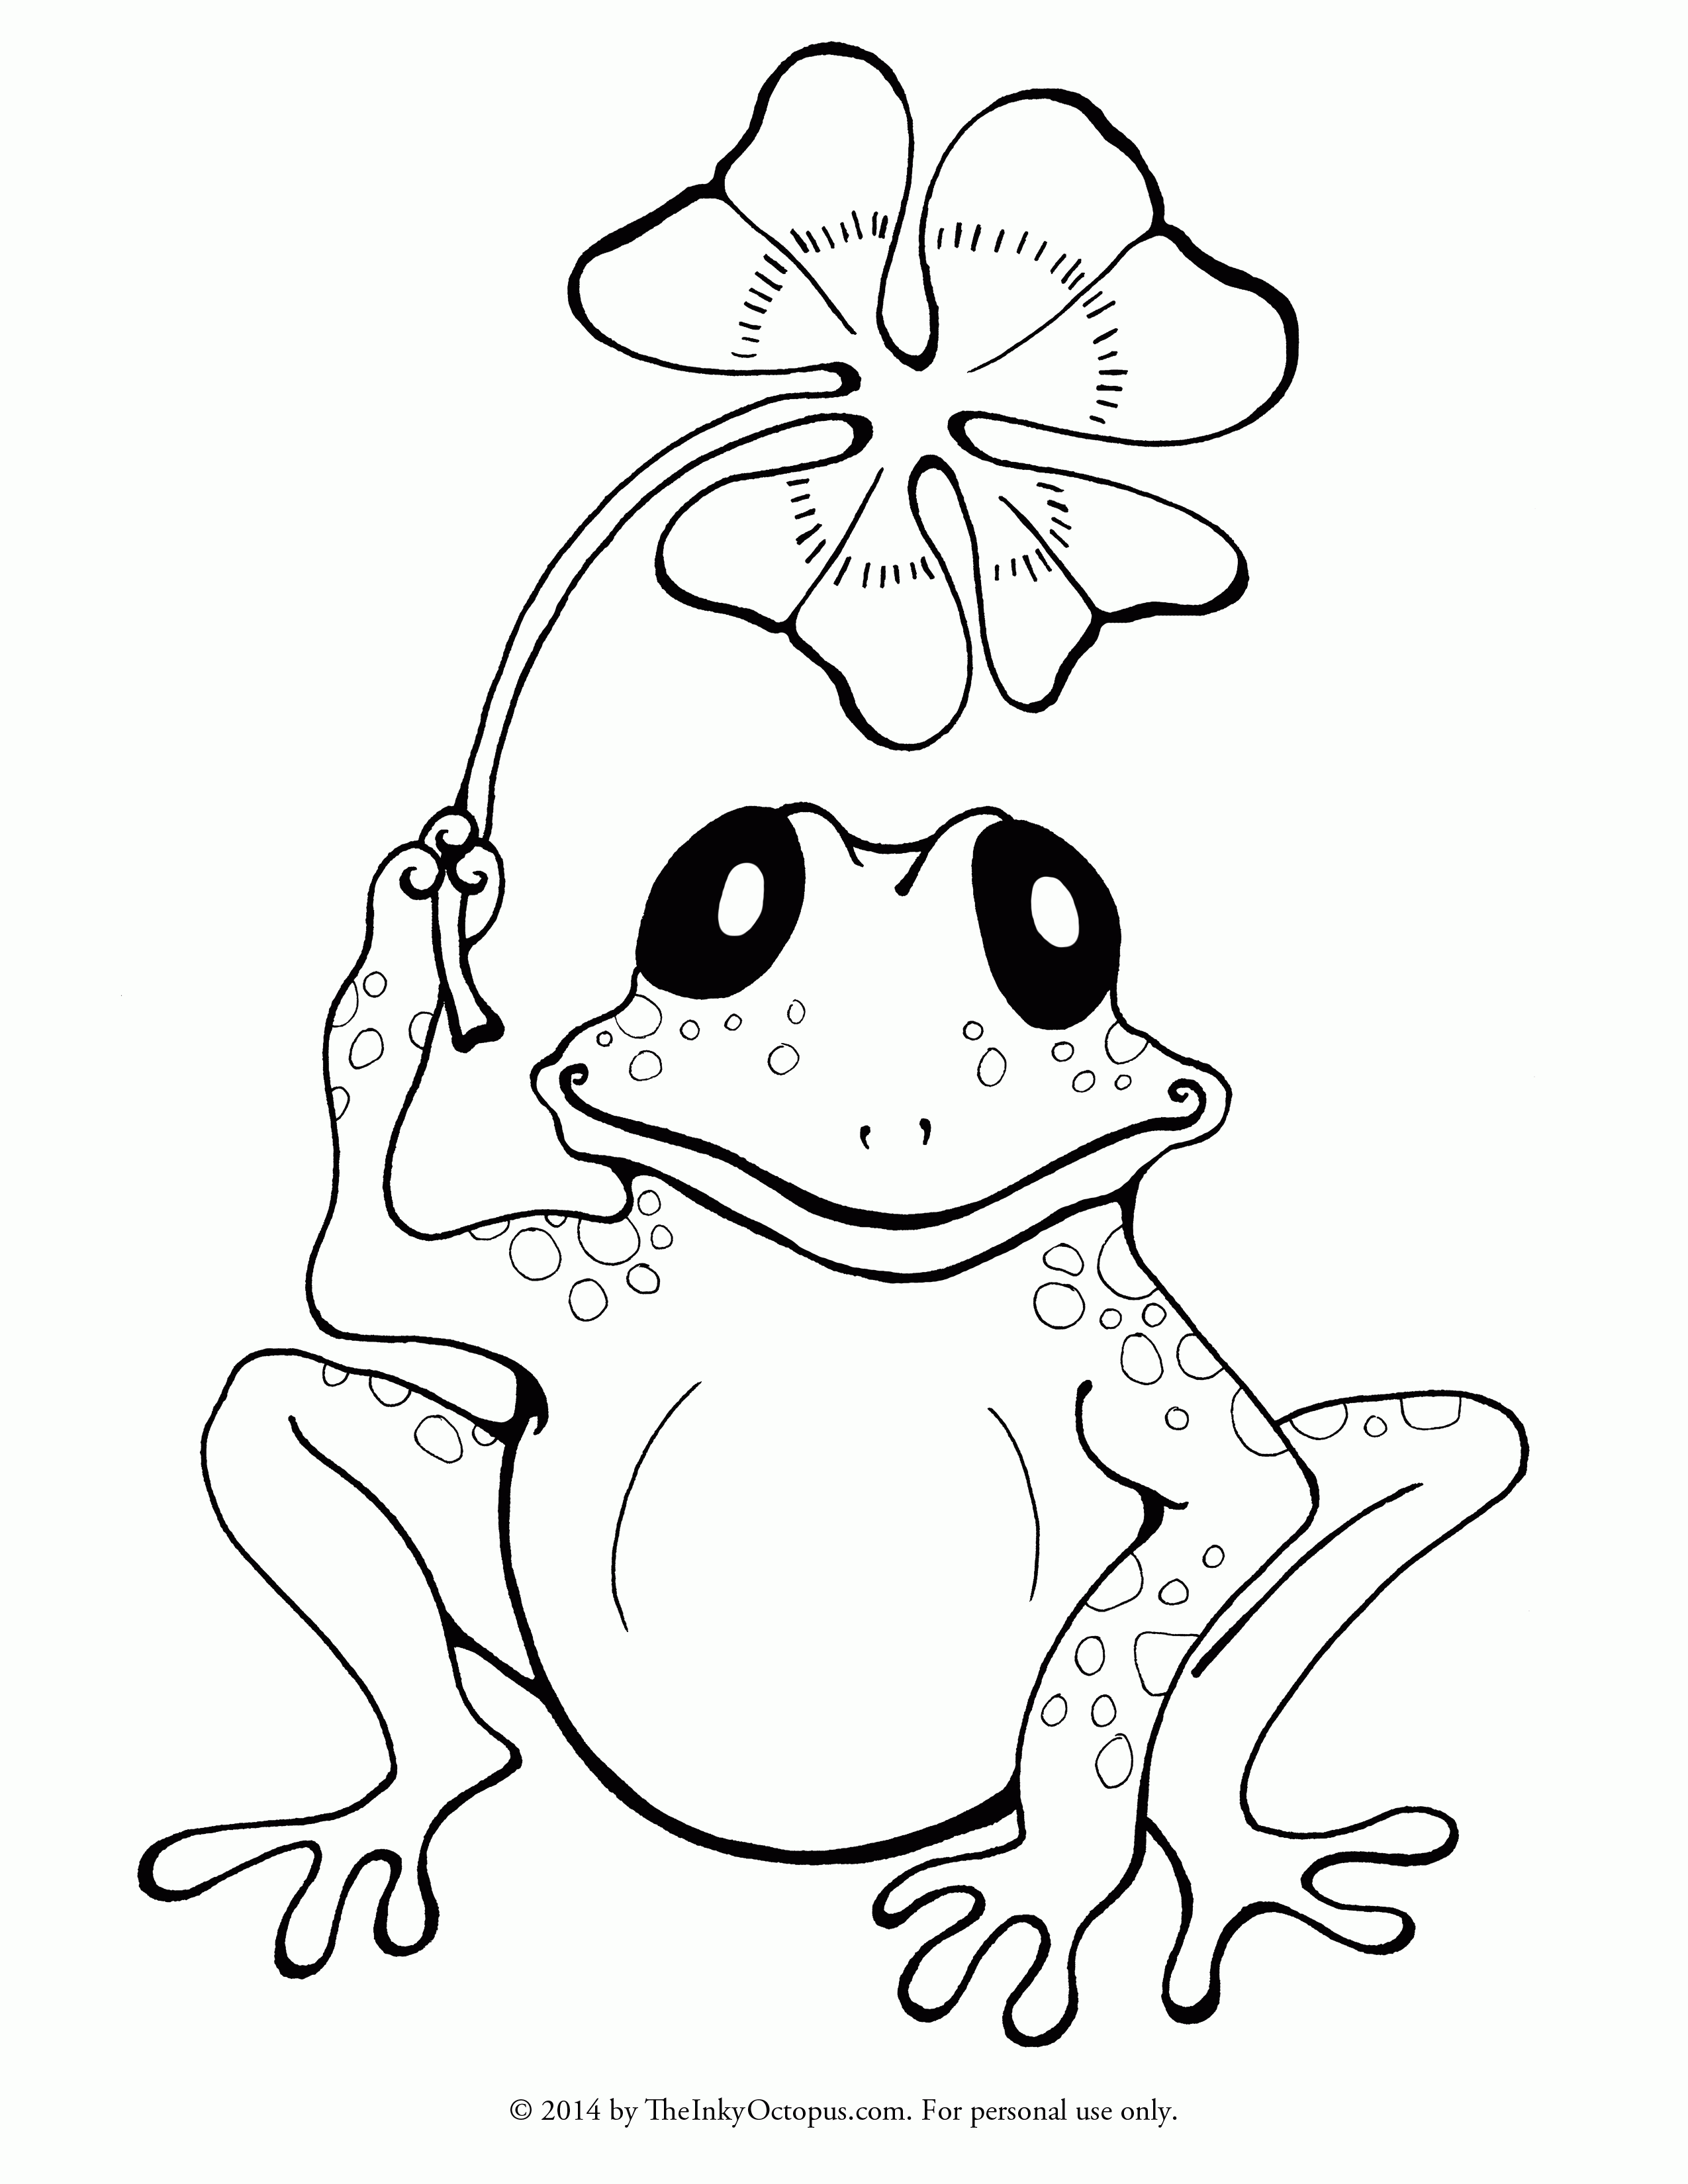 Cute Toad Coloring Pages To Print - Coloring Home